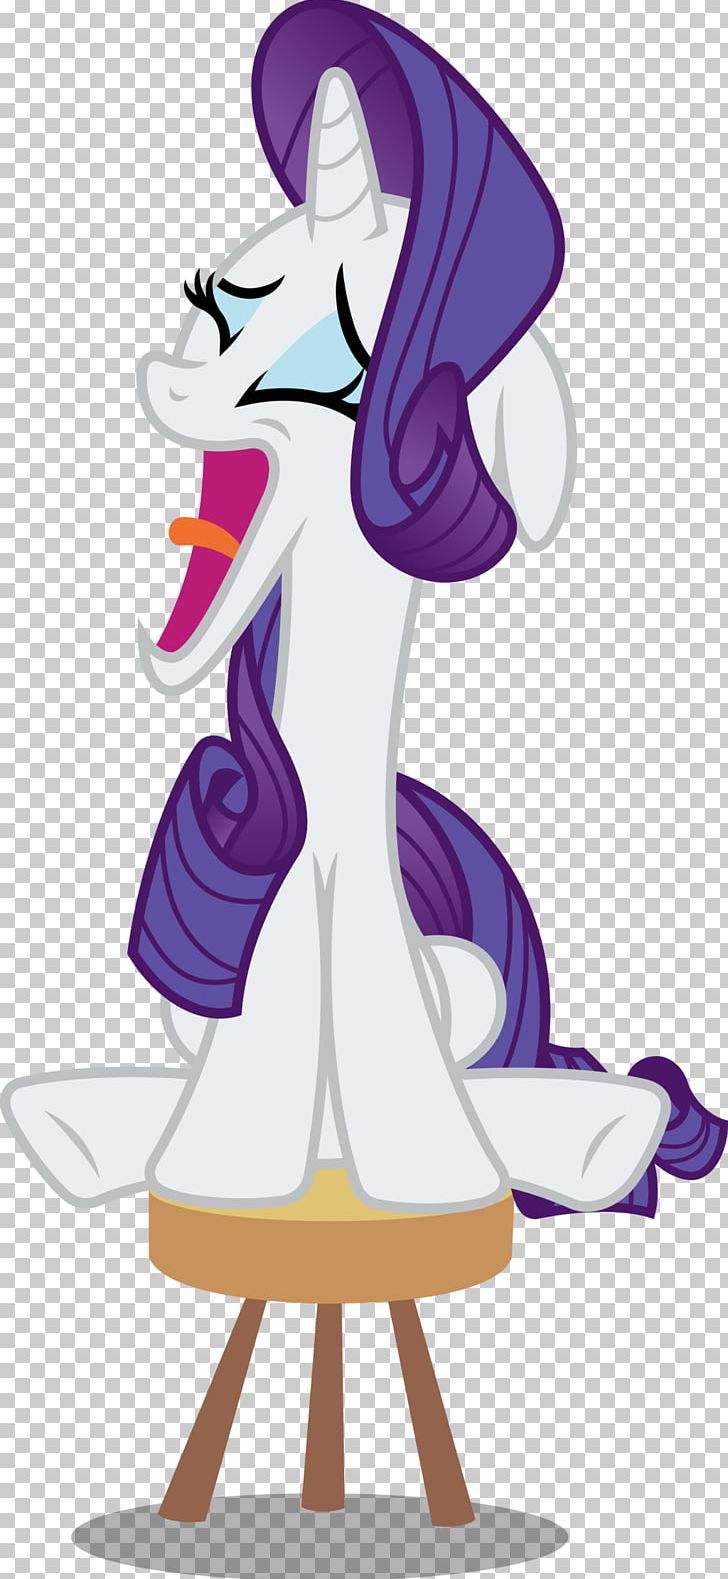 Horse Rarity Pony PNG, Clipart, Animals, Art, Artist, Cartoon, Clothing Free PNG Download